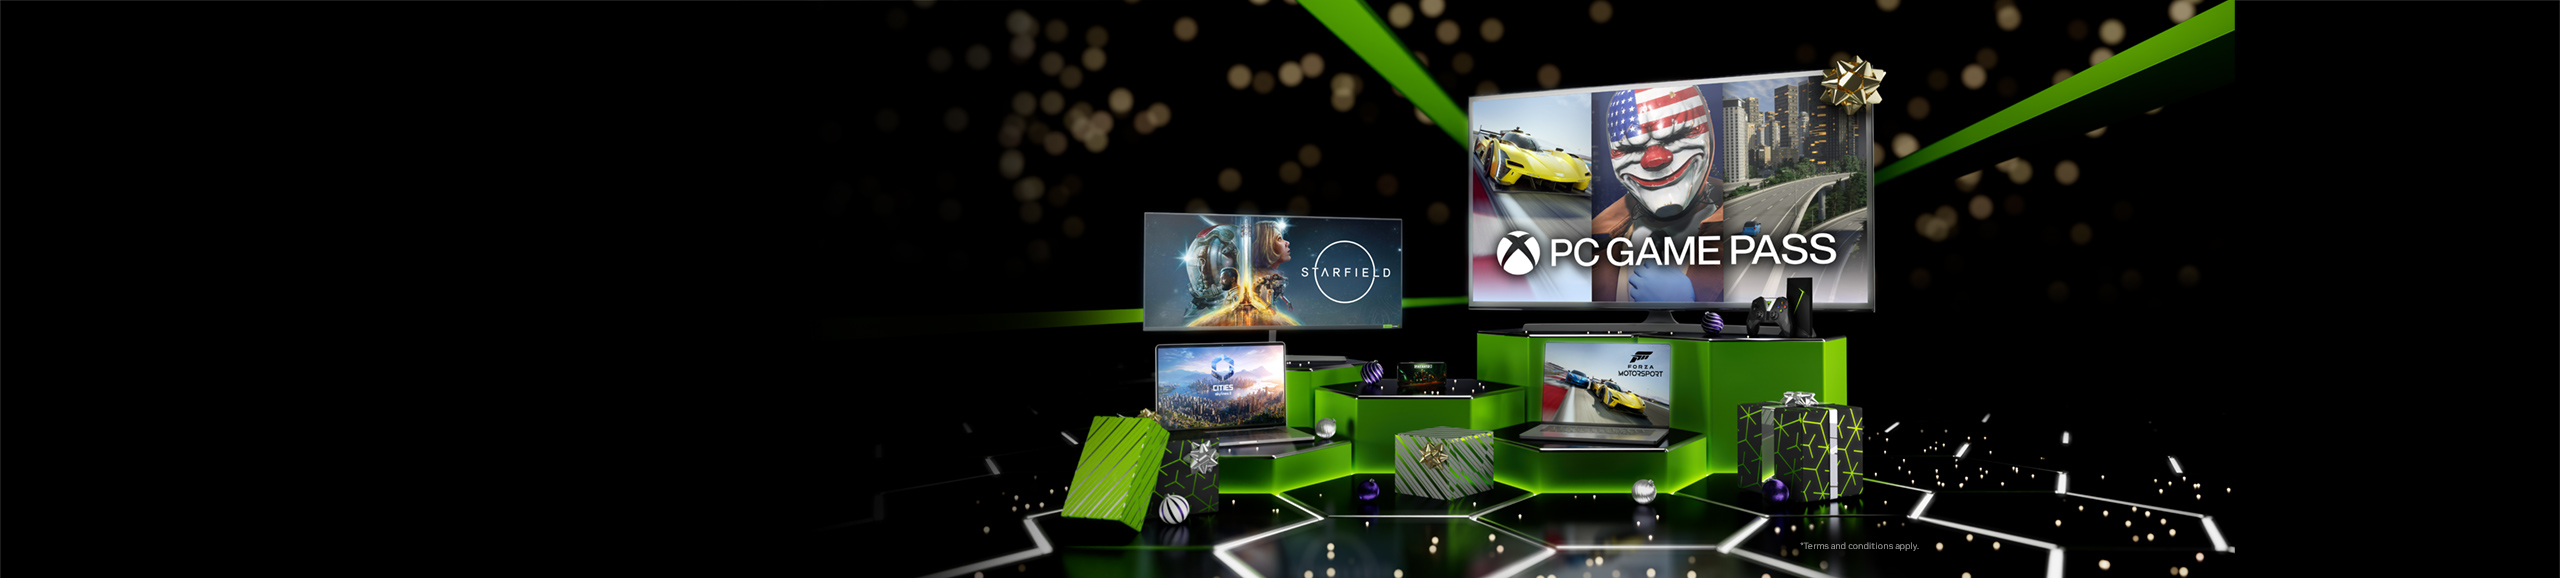 Everything To Know About NVIDIA GeForce Now Cloud Gaming - Fossbytes